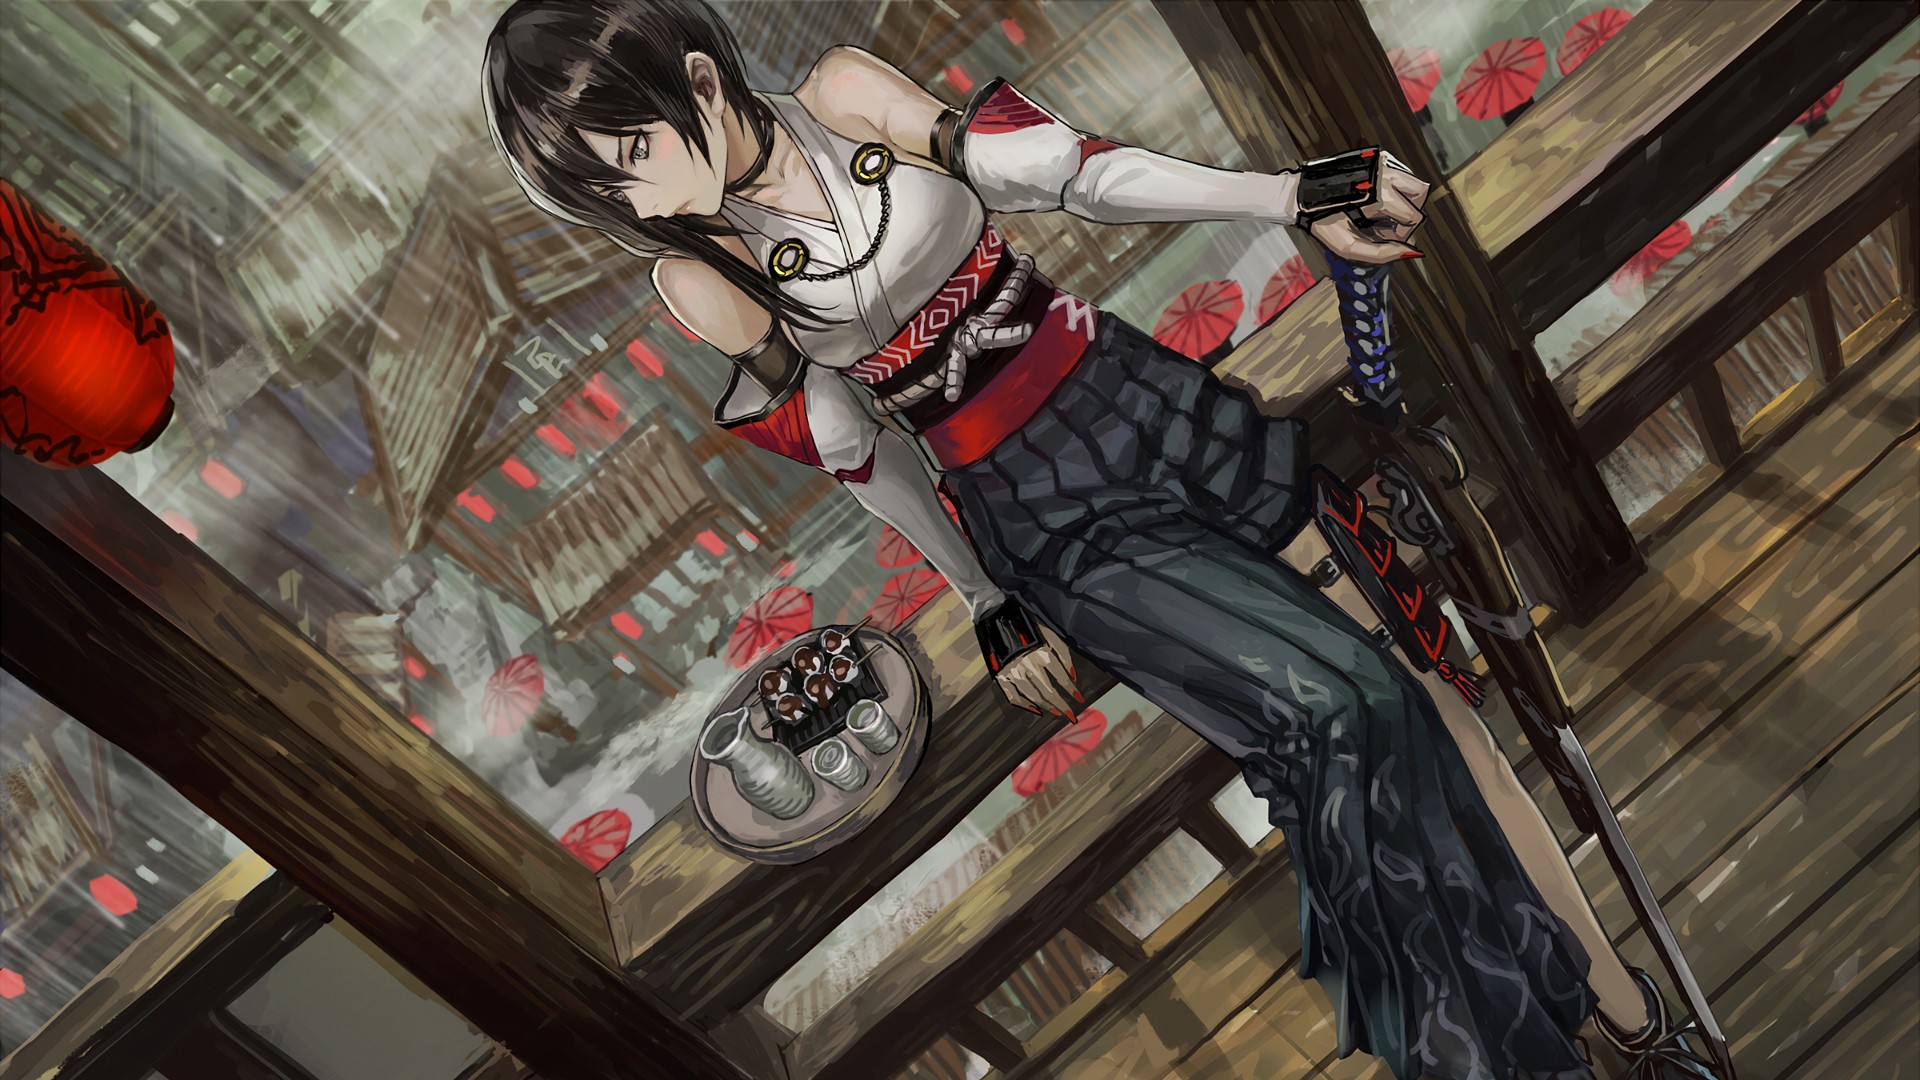 Anime 1920x1080 anime girls anime dark hair weapon rain Pixiv girls with guns red nails painted nails brunette looking away women